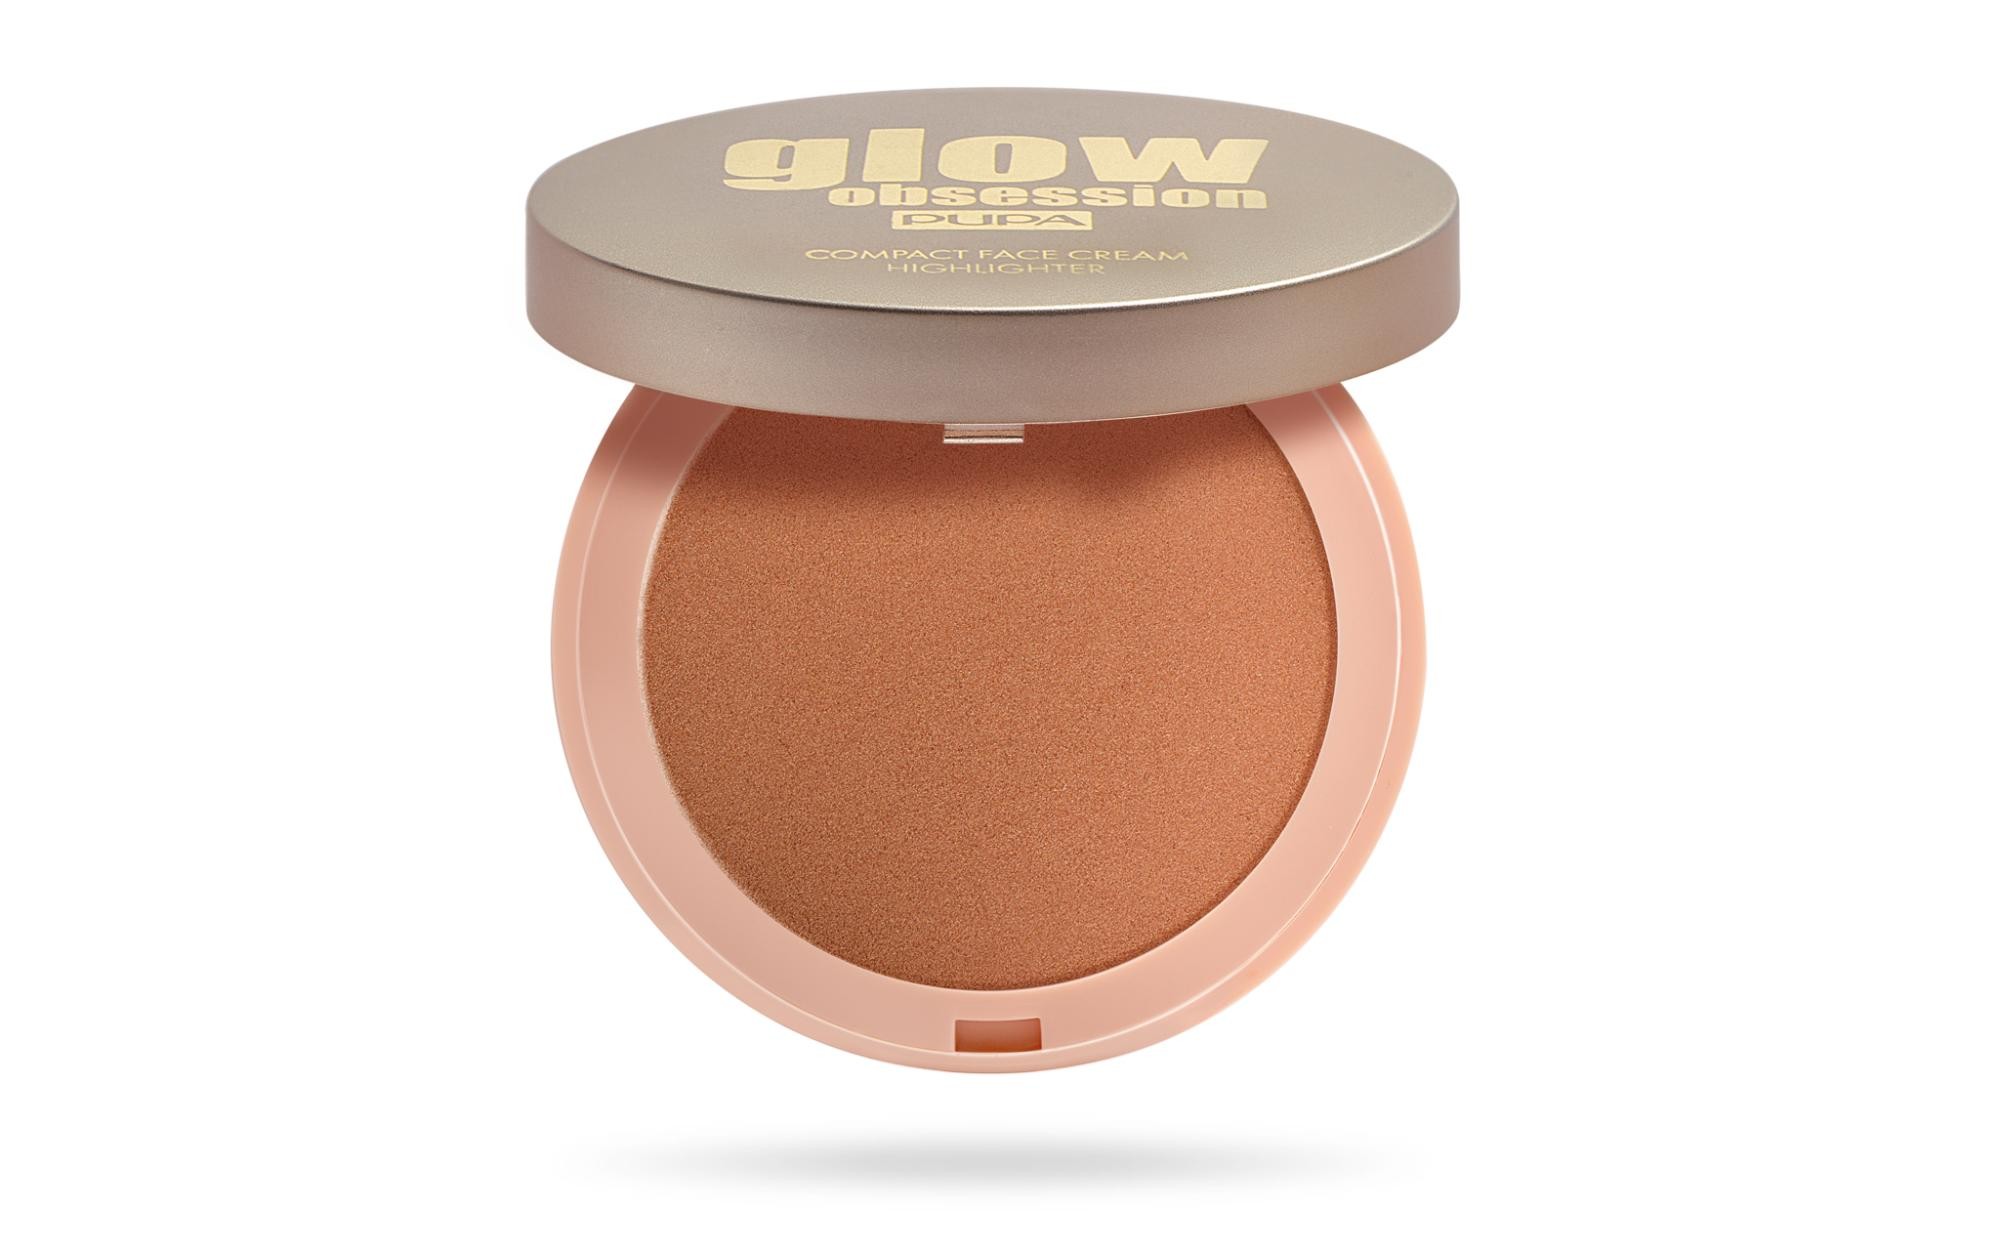 PUPA Milano Glow Obsession Compact Face Cream Highlighter 003 Copper 9g